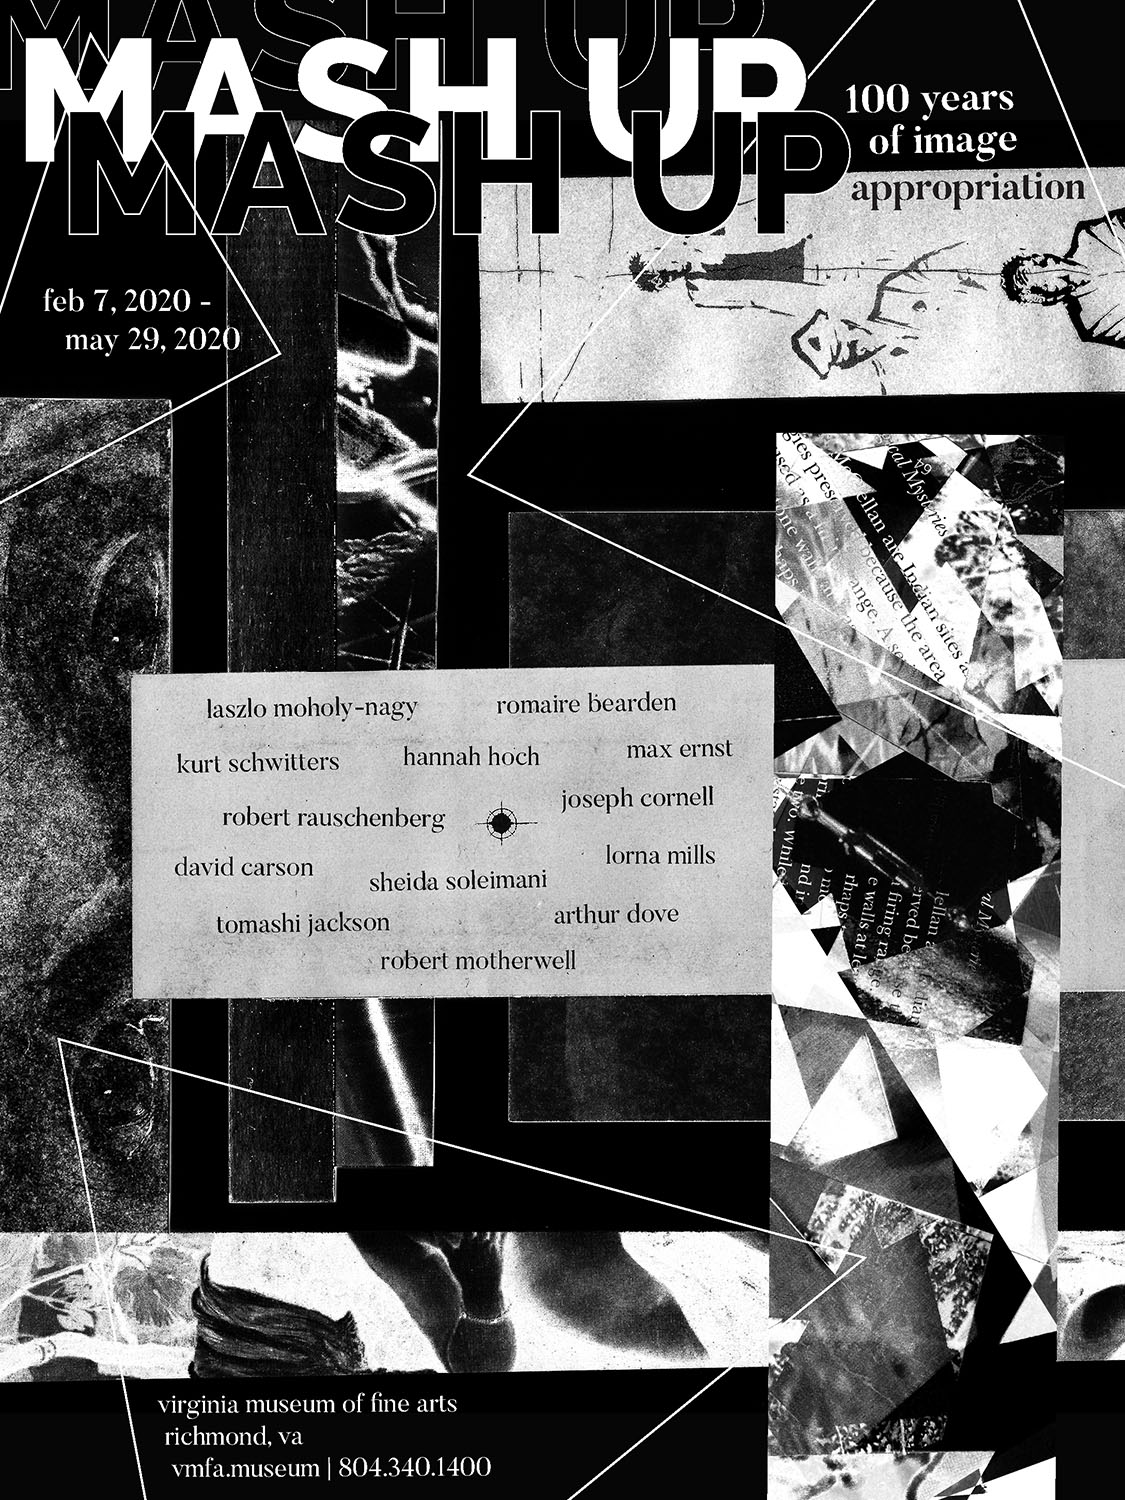 A poster for a fictional VMFA exhibition. The poster consists of a collage with rectangular pieces, overlapped by 3 triangular outlines that further serve to frame the text. The top text reads: 'MASH UP' repeated three times in a large sans-serif, followed by '100 years of image appropriation. feb 7, 2020 - may 29, 2020.' in smaller serif type. The center text includes the names of the proposed exhibitors: 'laszlo moholy-nagy, romaire bearden, kurt schwitters, hannah hoch, max ernst, robert rauschenberg, joseph cornell, david carson, sheida soleimani, lorna mills, tomashi jackson, arthur dove, robert motherwell.' The bottom text reads: virginia museum of fine arts, richmond, va, vmfa.museum | 804.340.1400